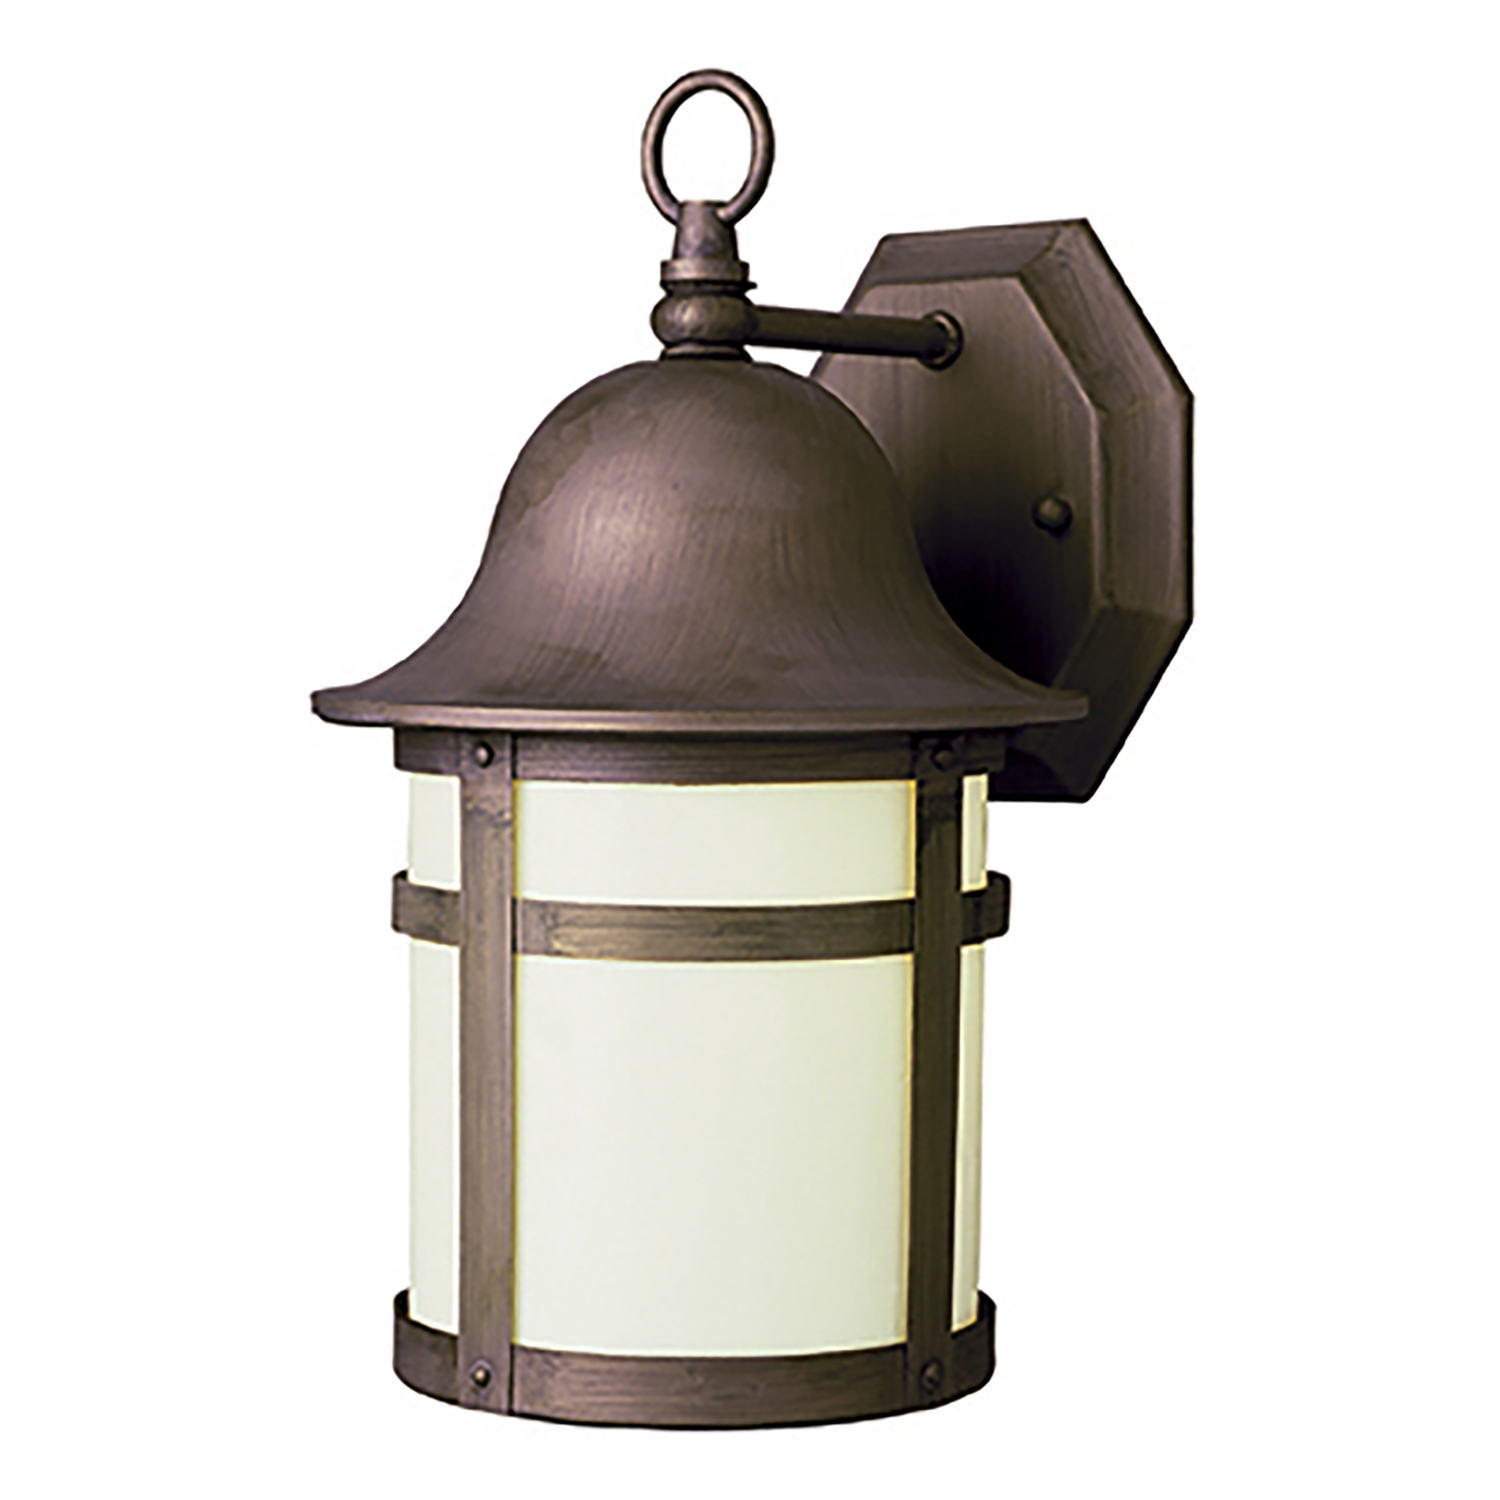 Bel Air Lighting Thomas Weathered Bronze Brown Switch Incandescent Wall Lantern - image 1 of 2